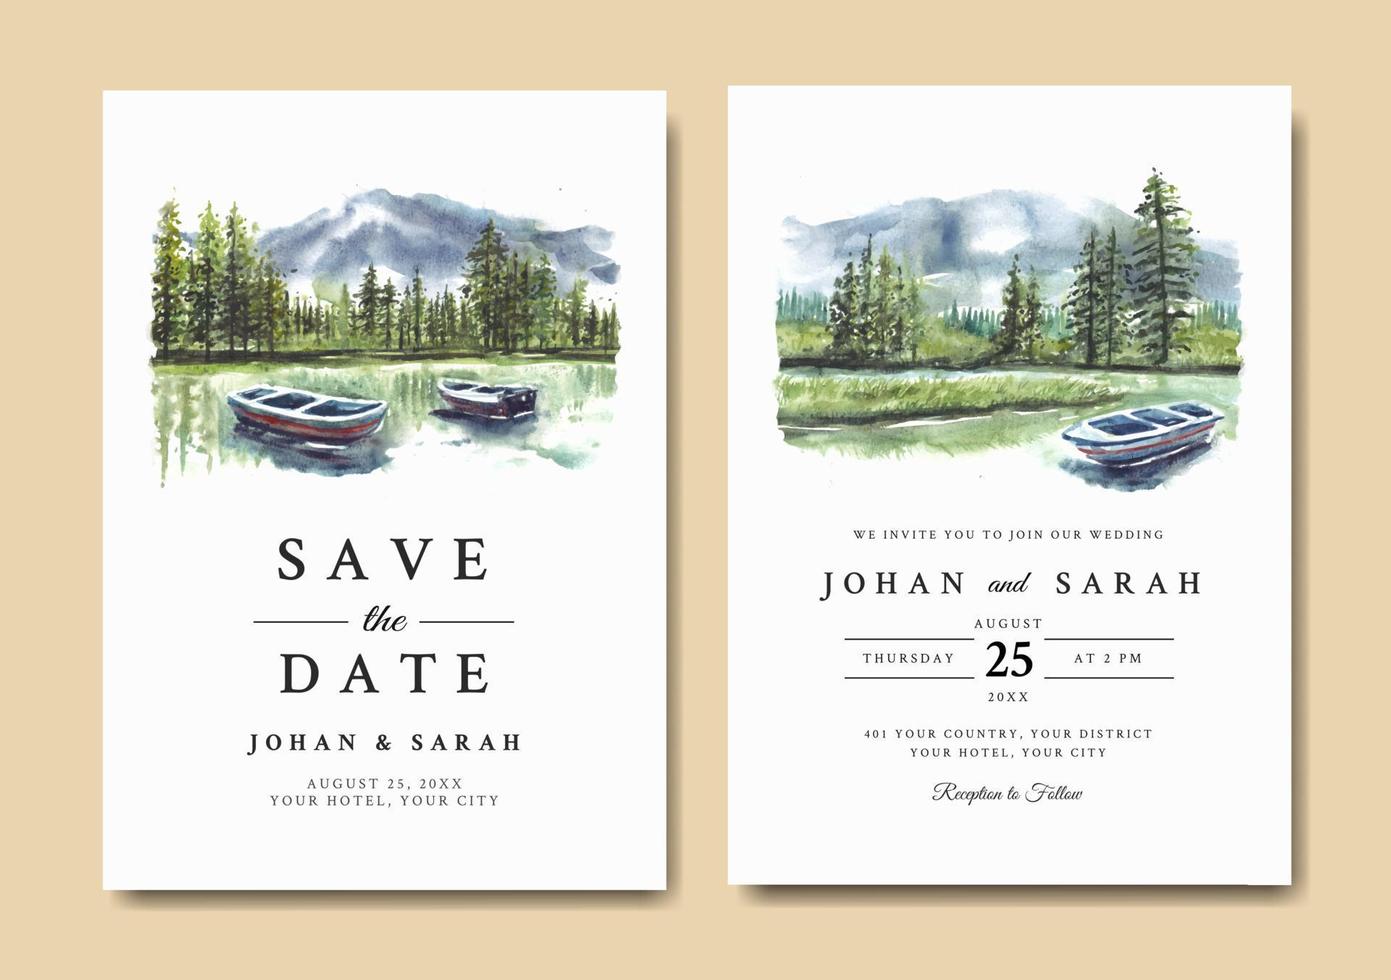 Wedding invitation with reflection of pine forest and boat in lake watercolor vector